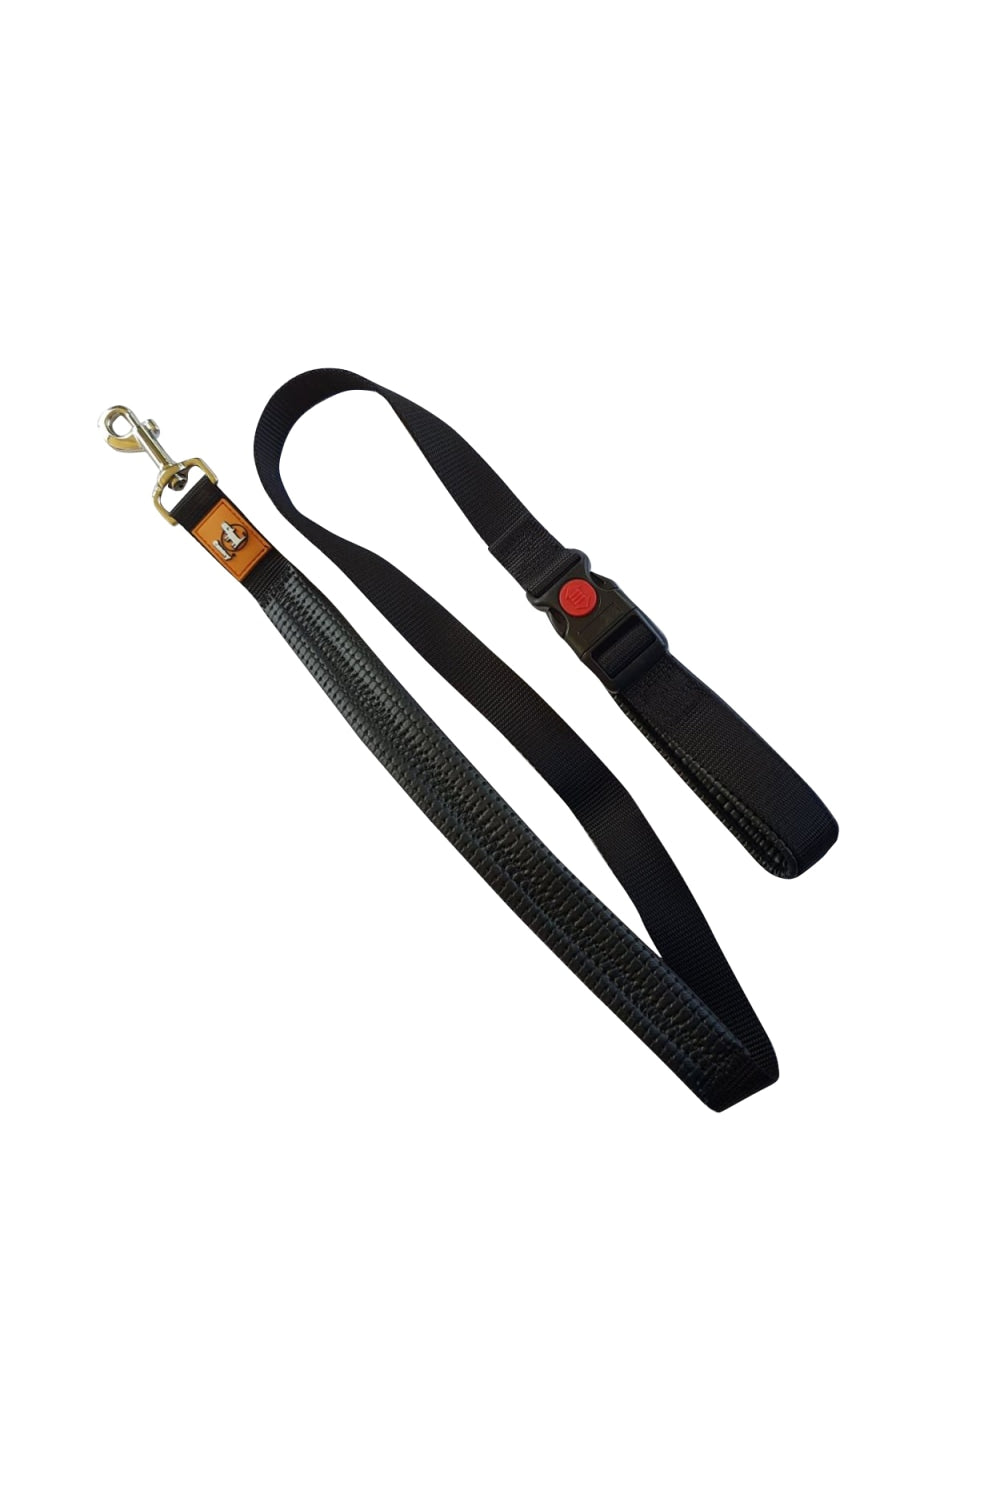 Canny Connect Dog Lead (Black) (0.5in x 47.2in)